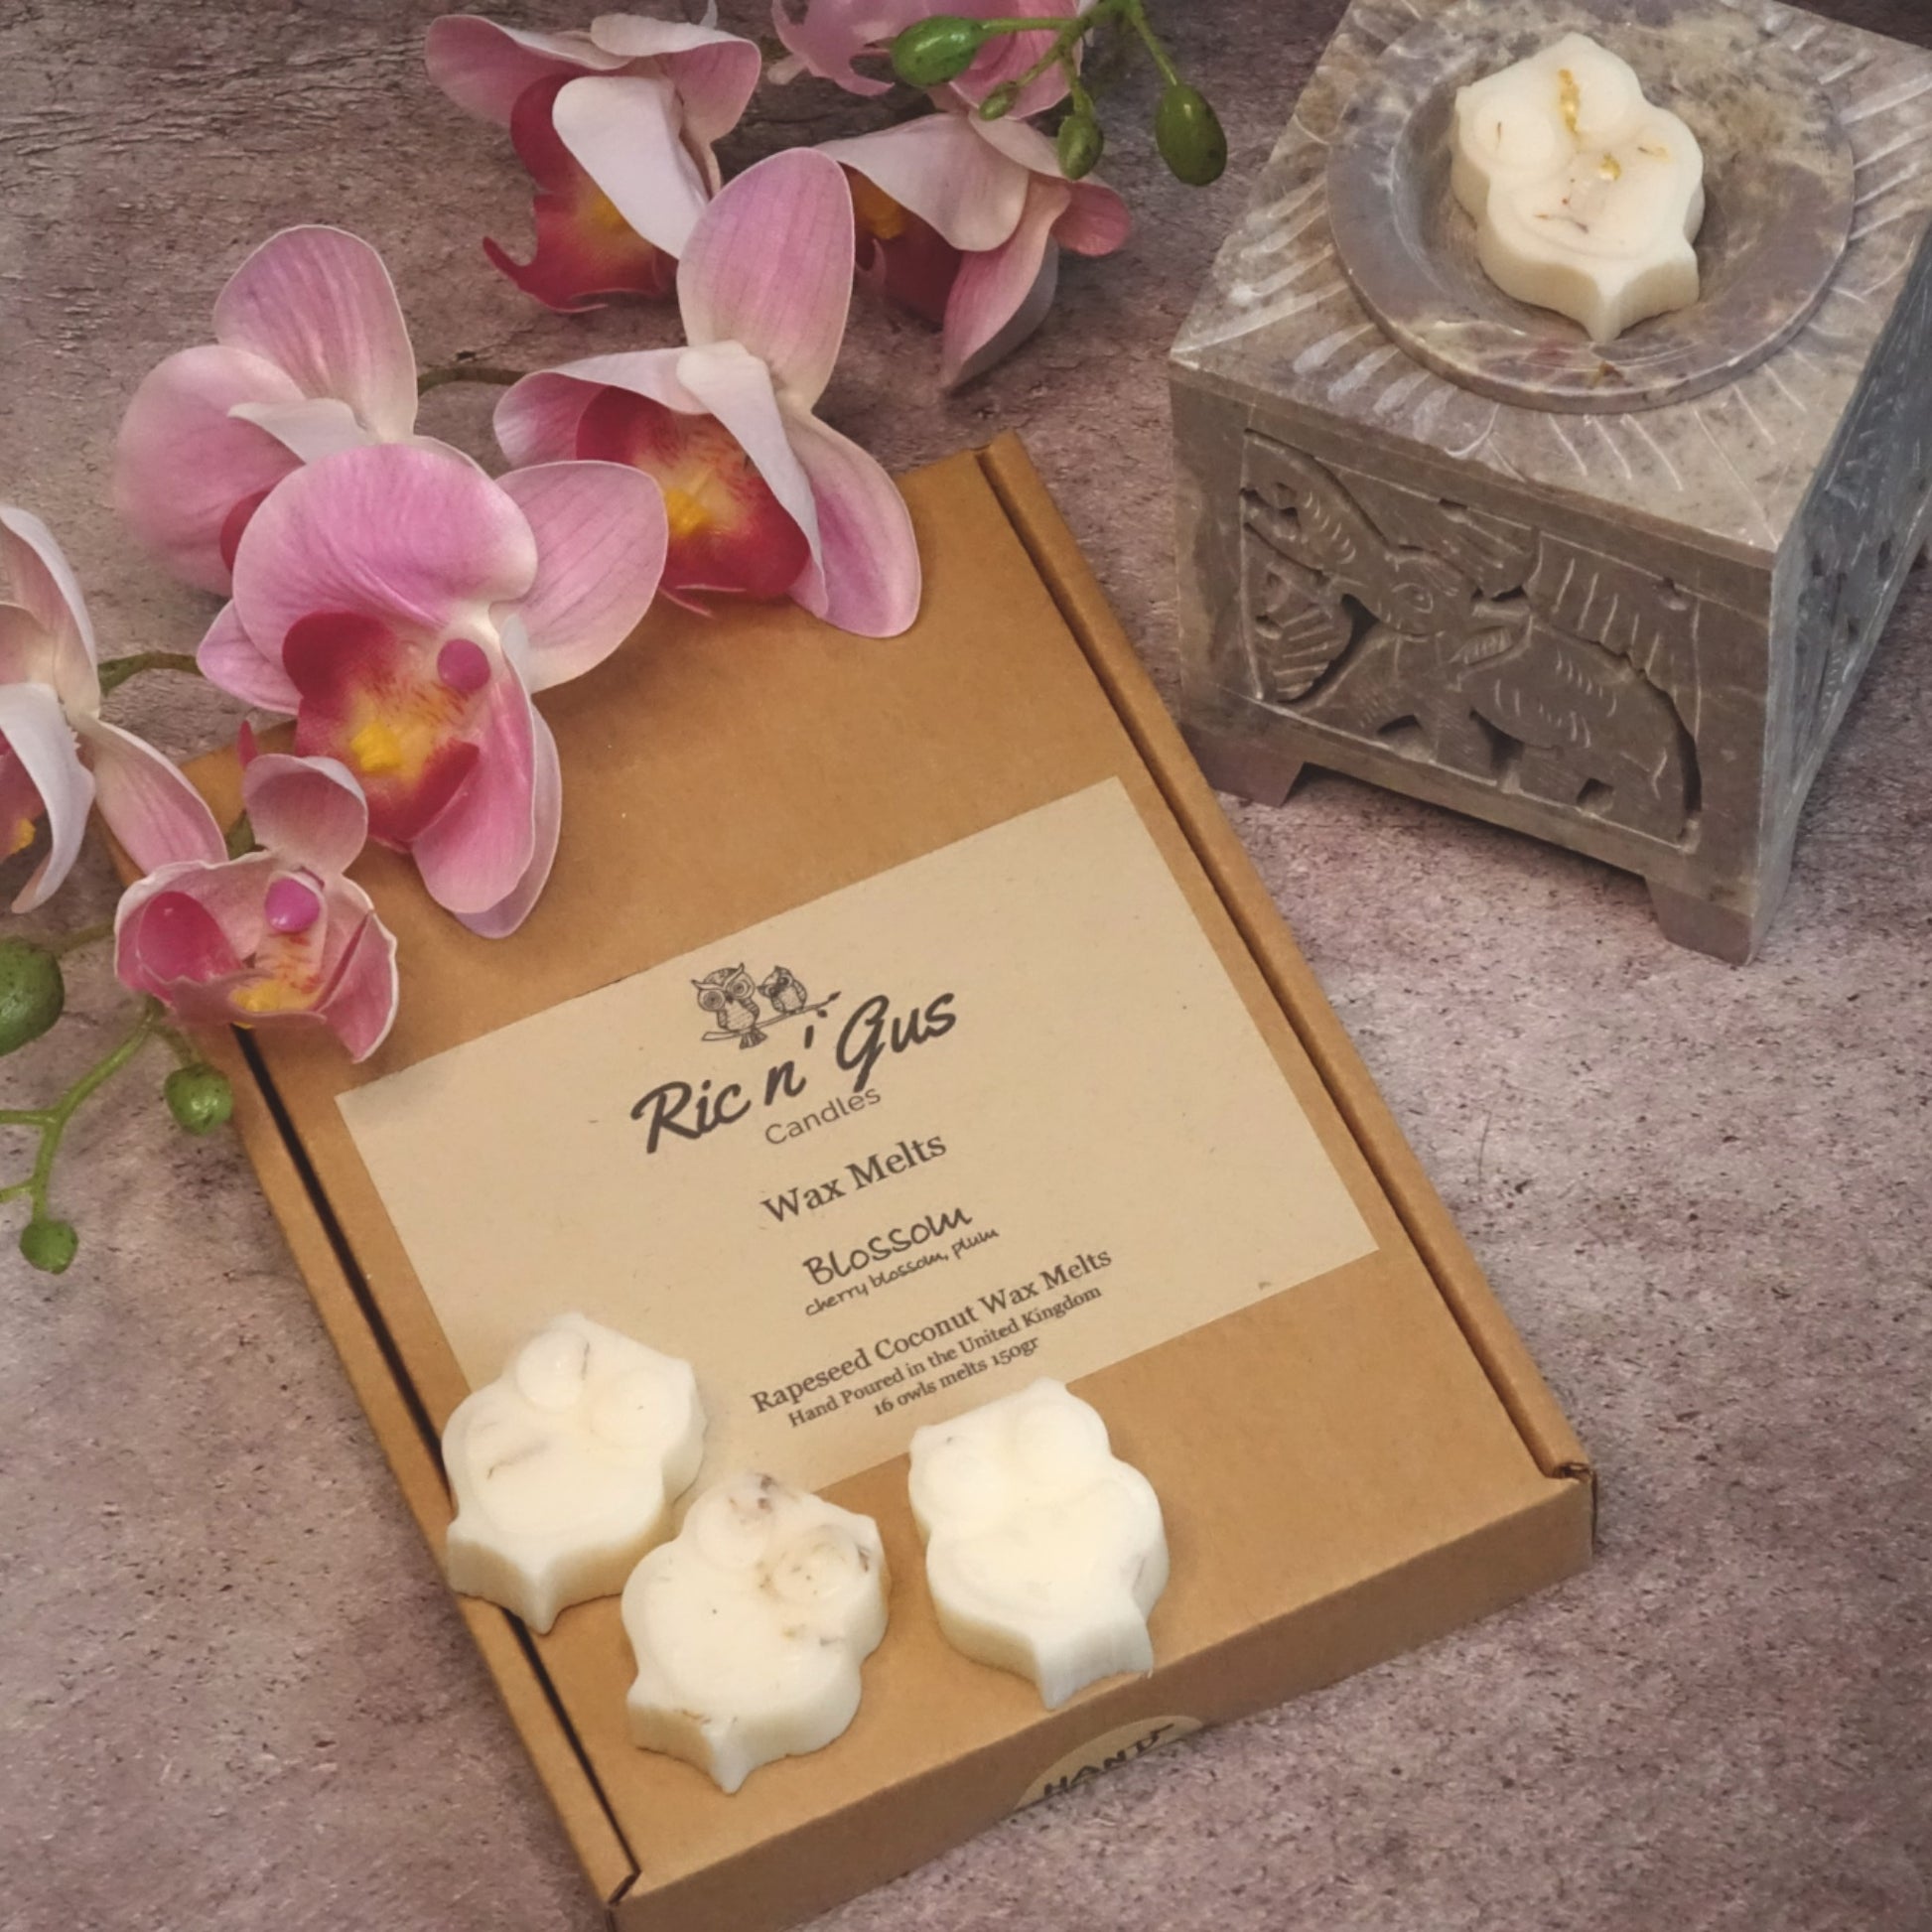 natural highly scented wax melts ric n'gus candles cherry blossom and plum 3